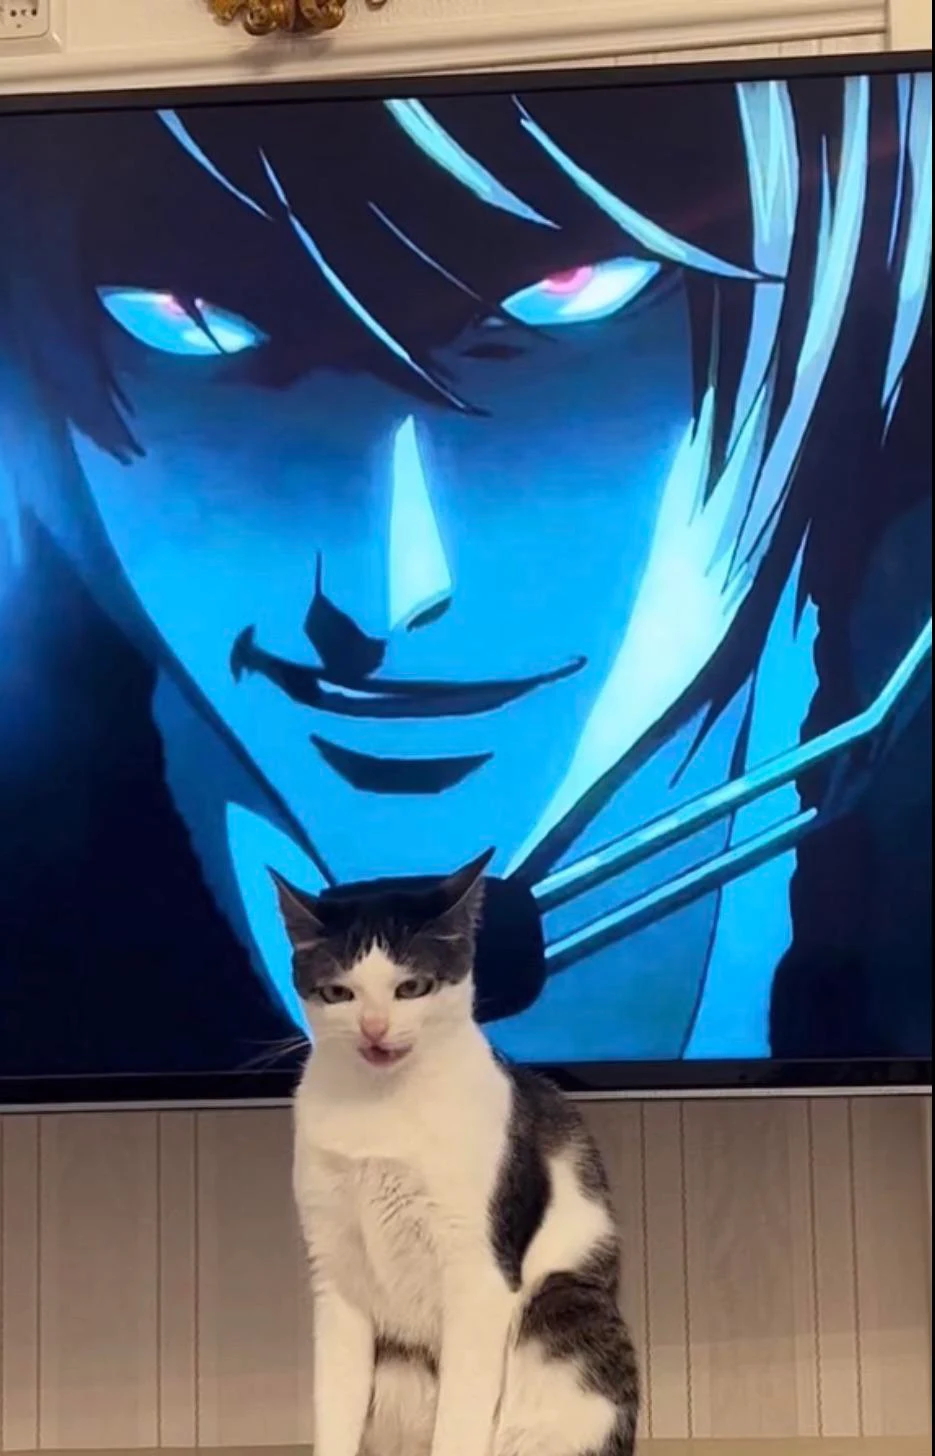 Cat thinks its an anime character.